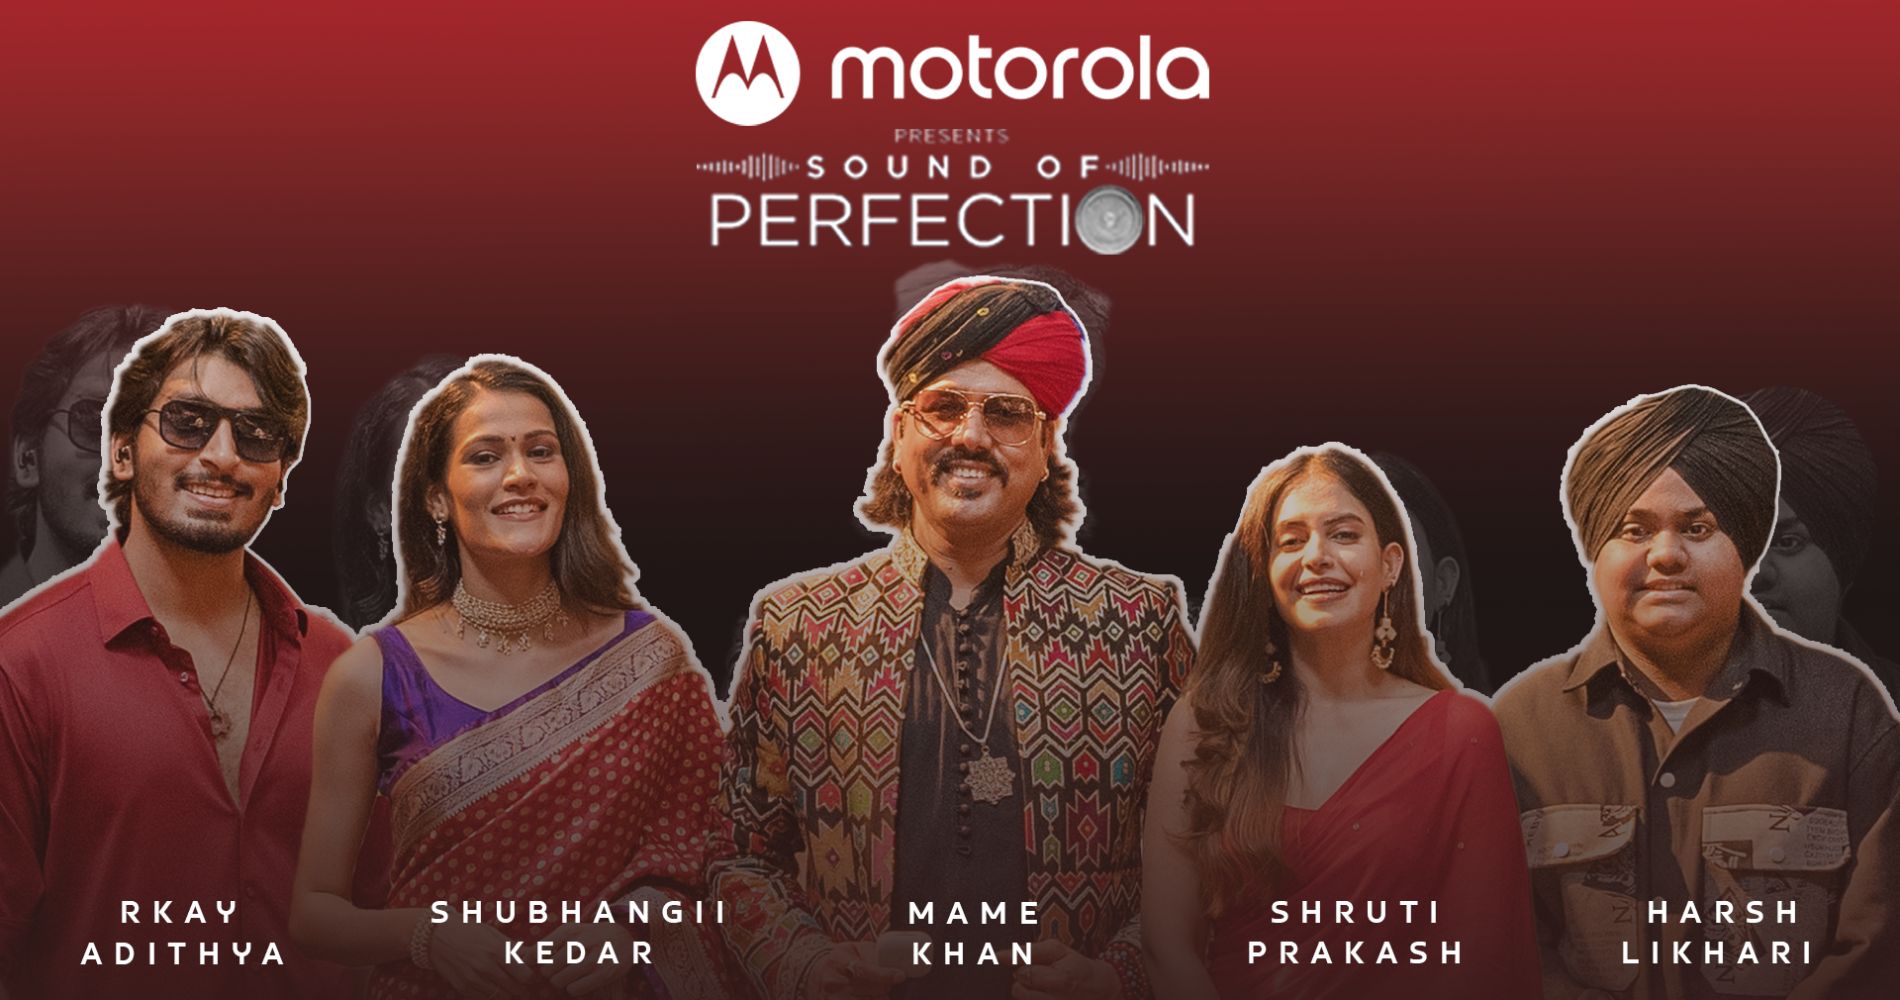 Motorola Debuts 'Sound Of Perfection' With Leading Indian Artists At